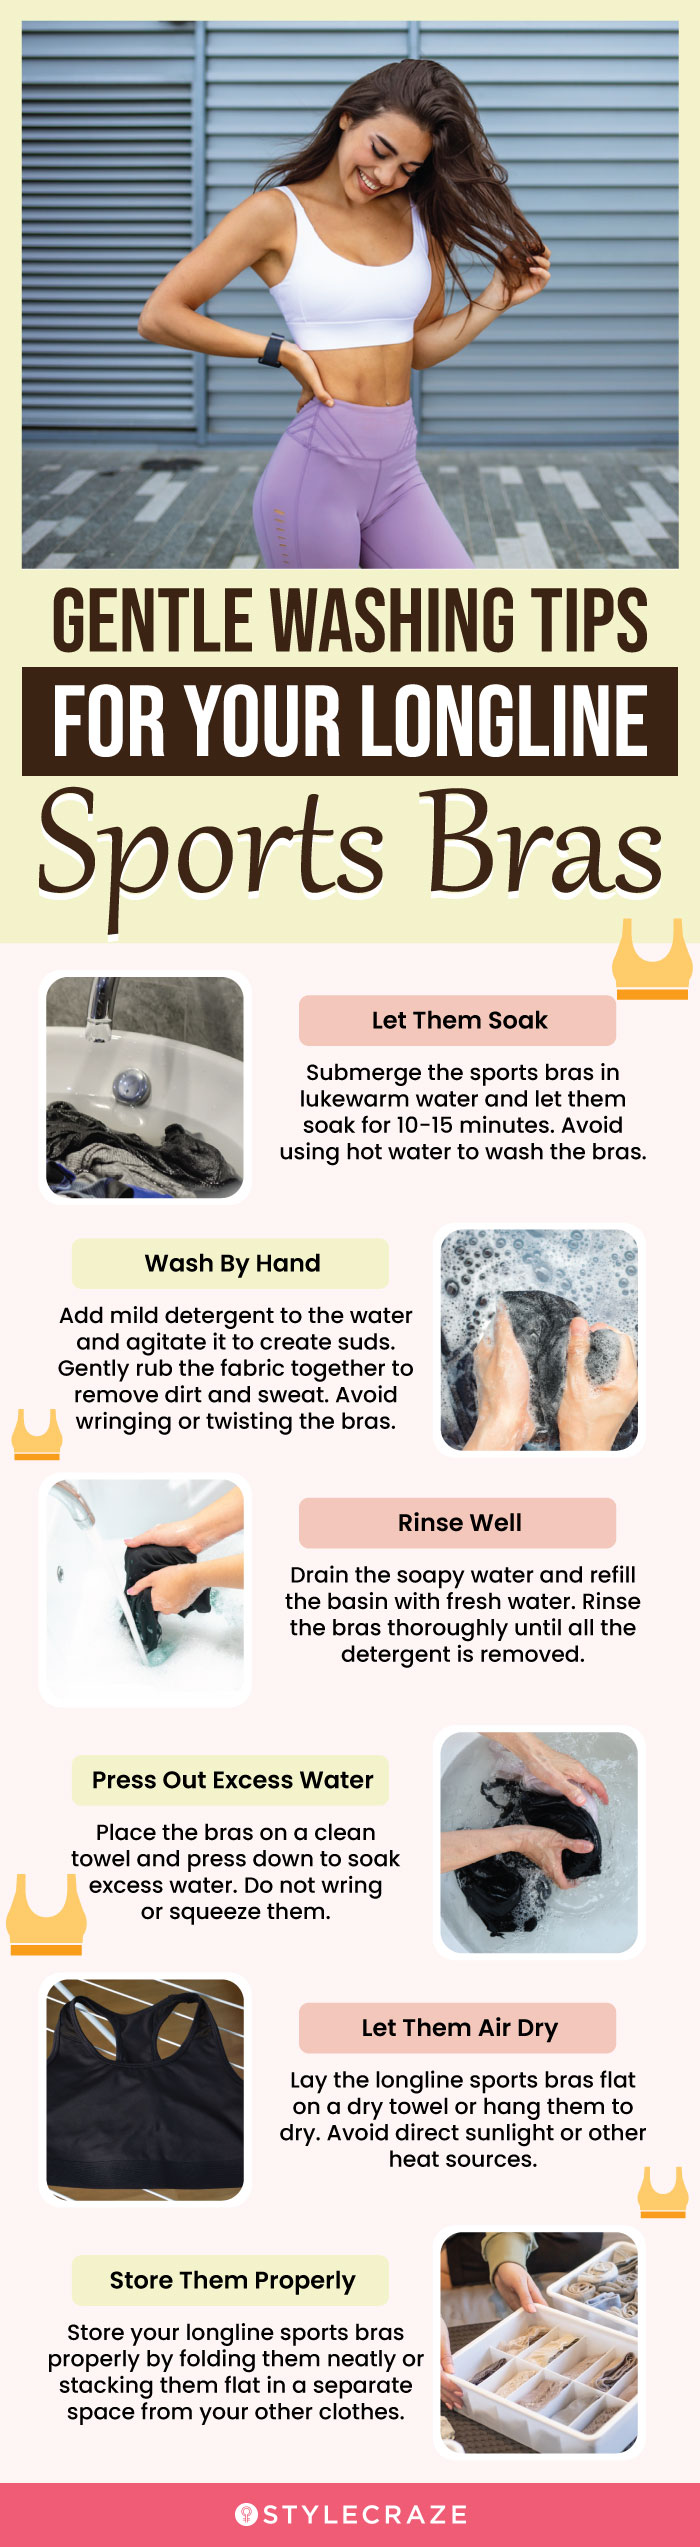 Gentle Washing Tips For Your Longline Sports Bras (infographic)